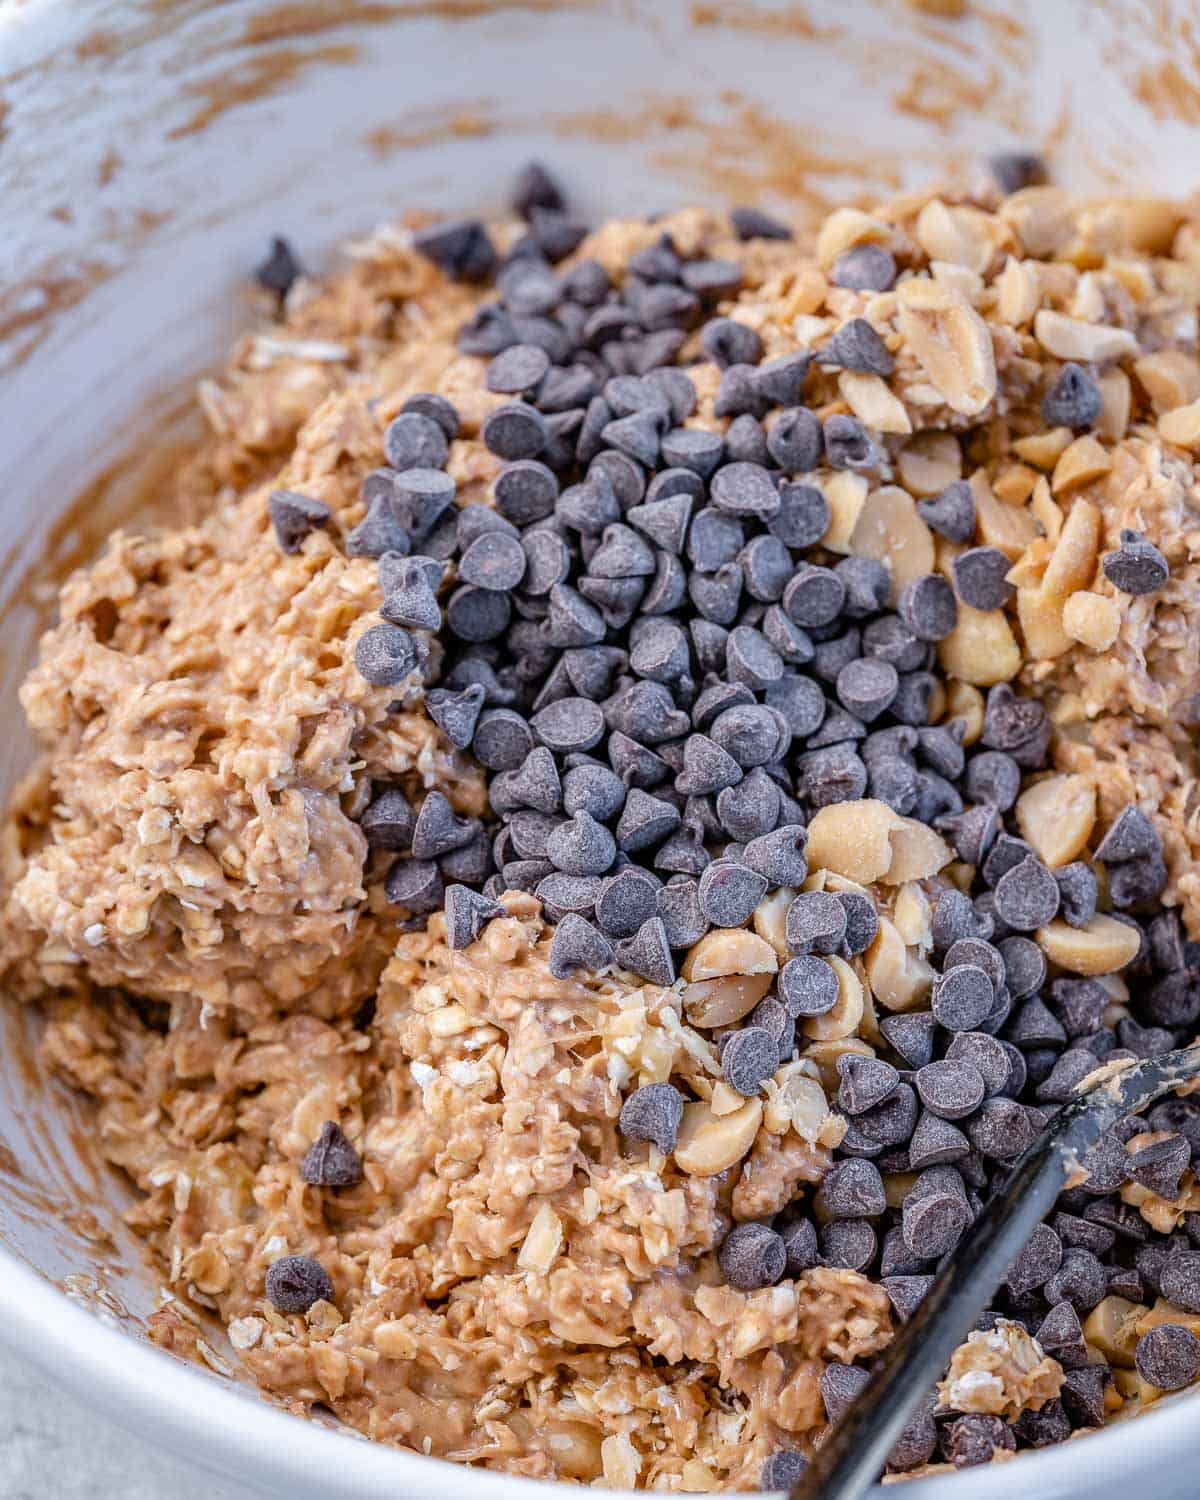 mixing chocolate chips into oat mixture with peanuts and peanut butter